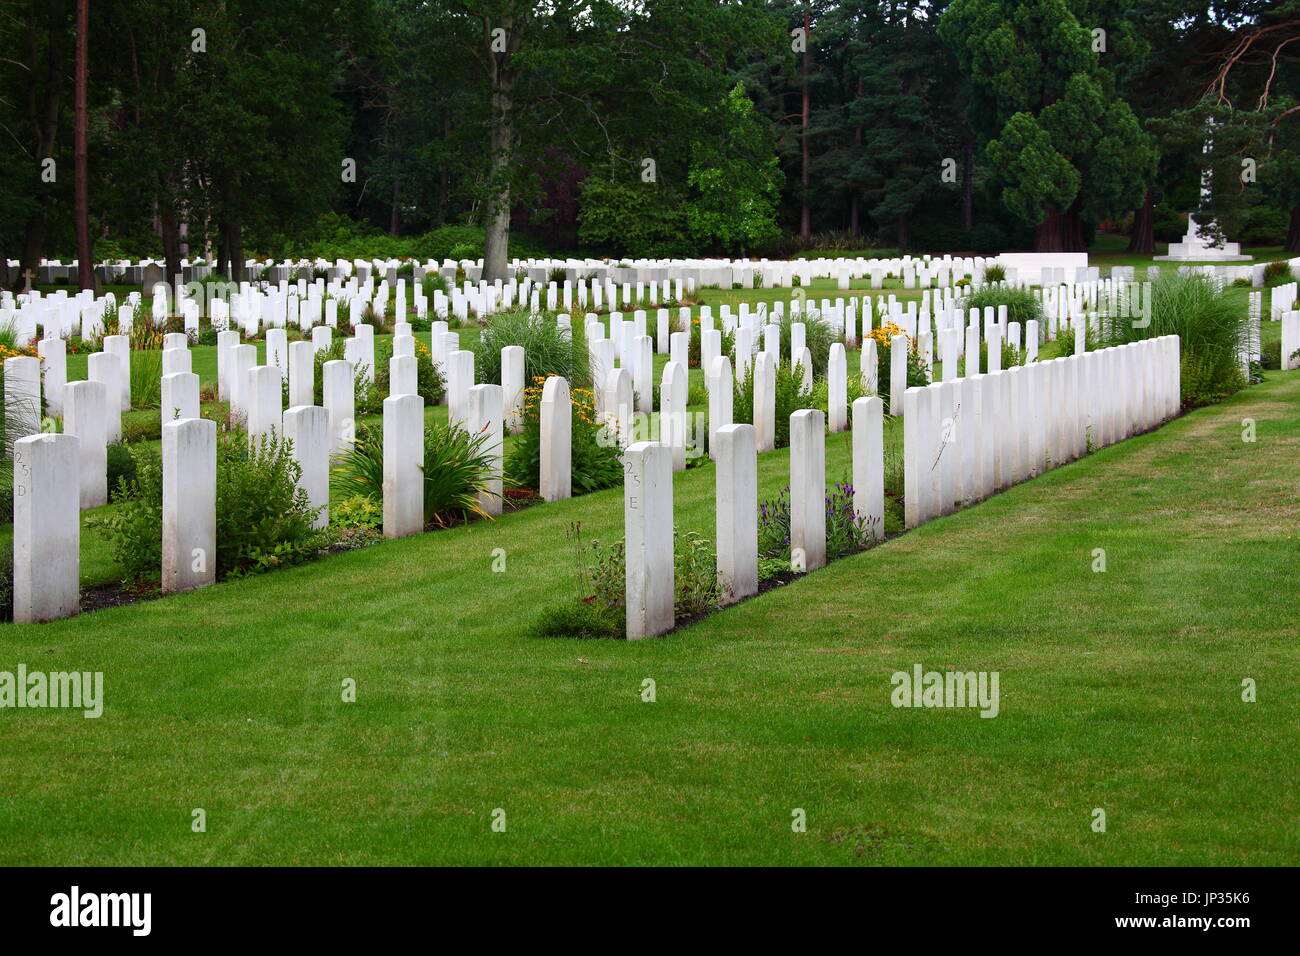 Brookwood Cemetery and Military Cemetery, also known as the London Necropolis, in Surrey. The largest cemetery in the United Kingdom established 1852. Stock Photo